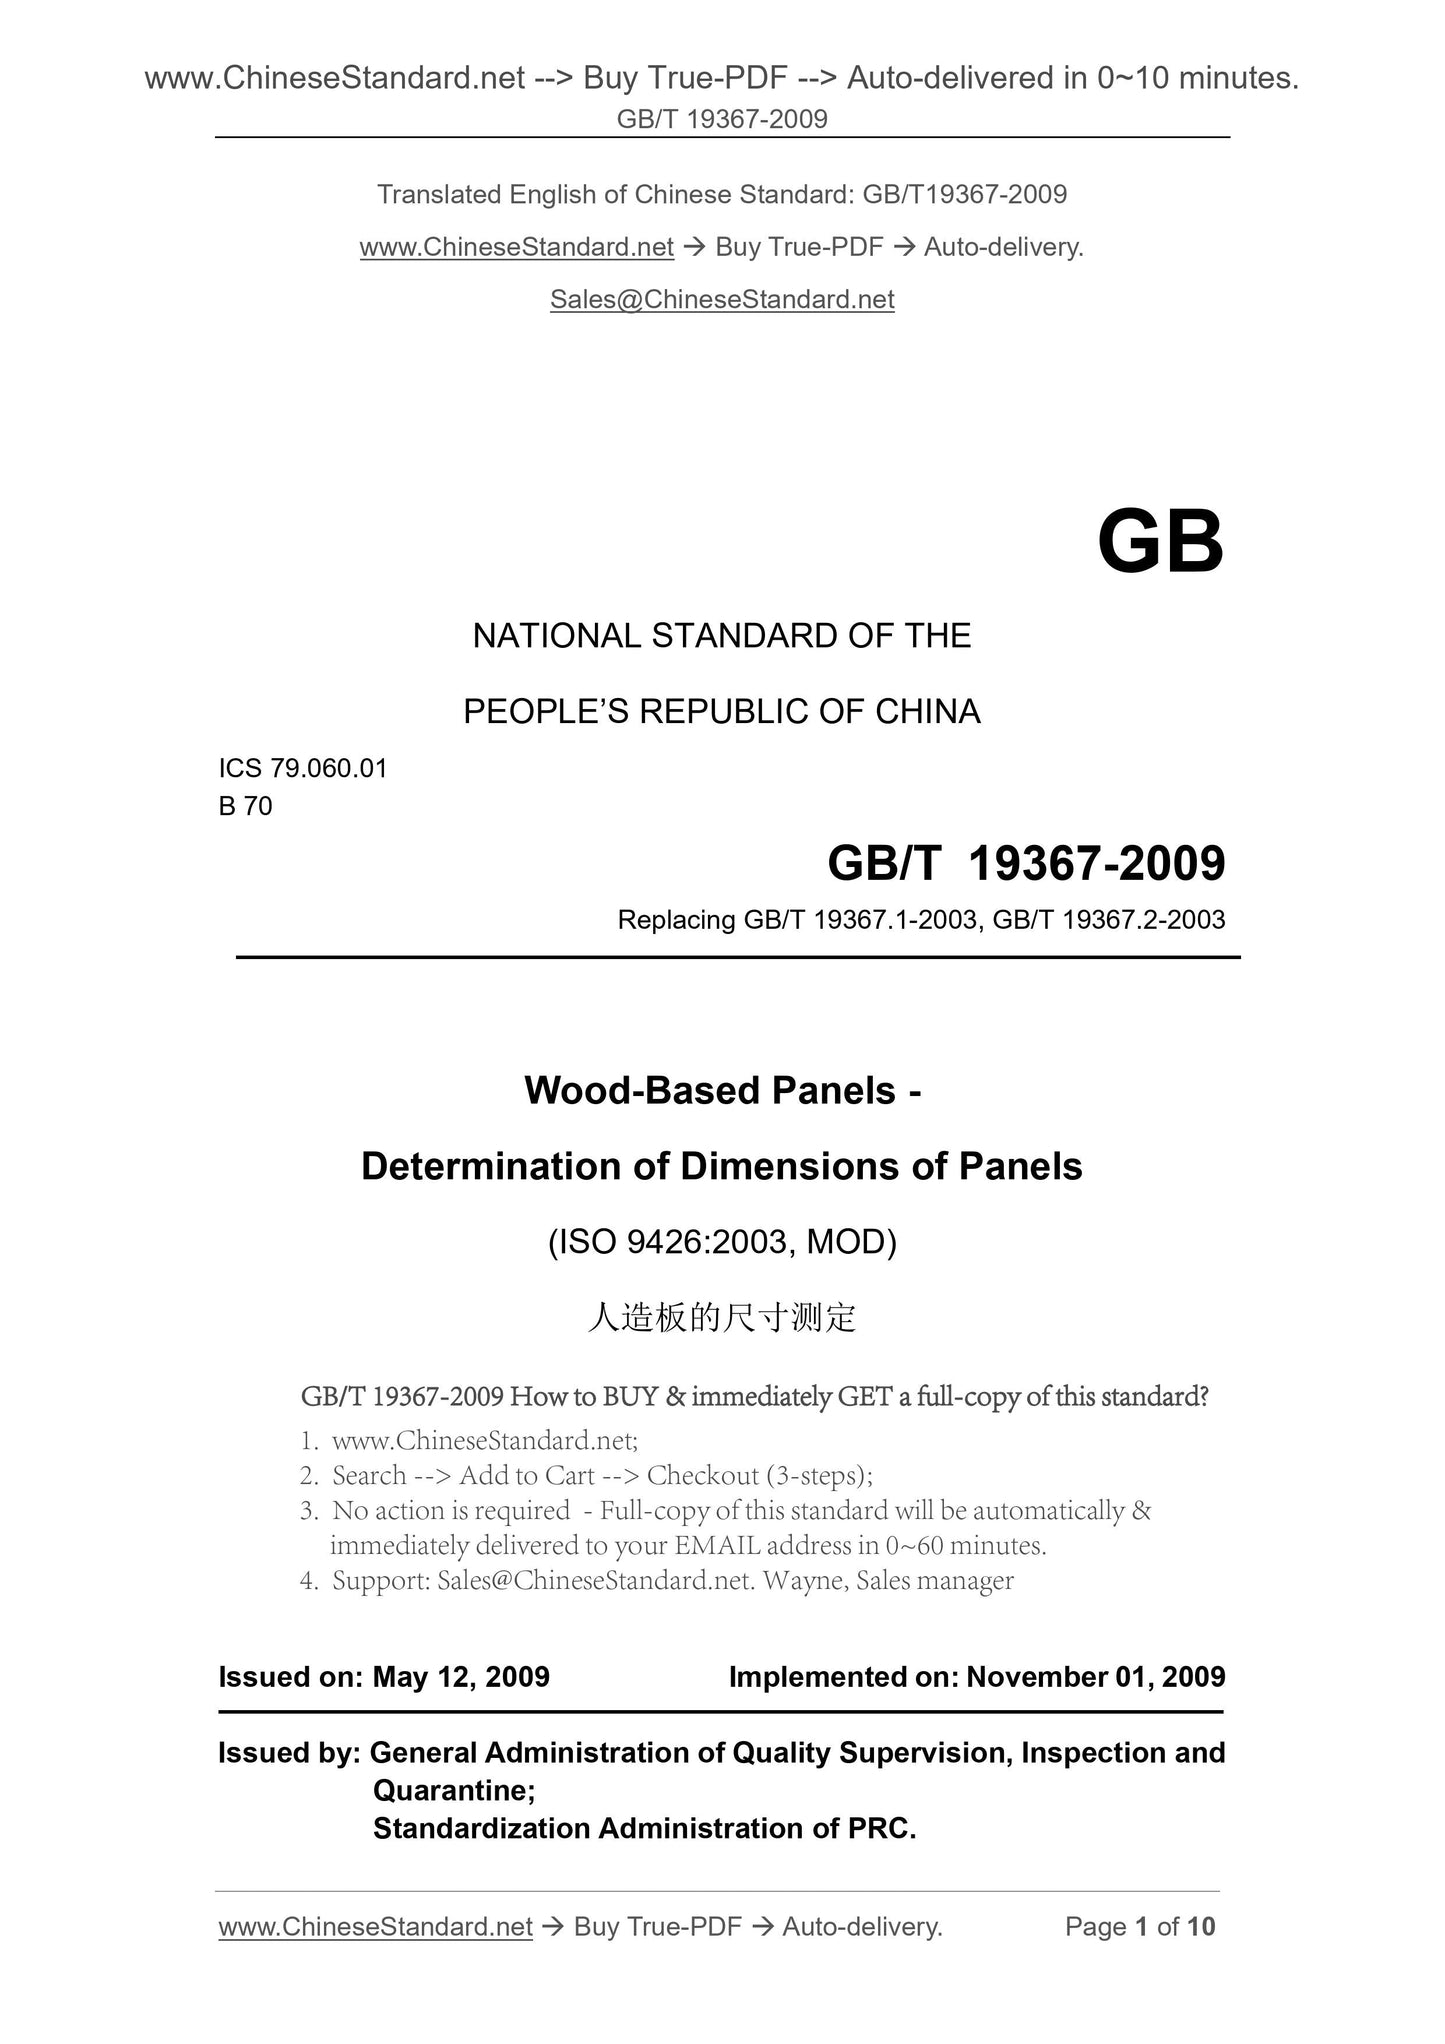 GB/T 19367-2009 Page 1